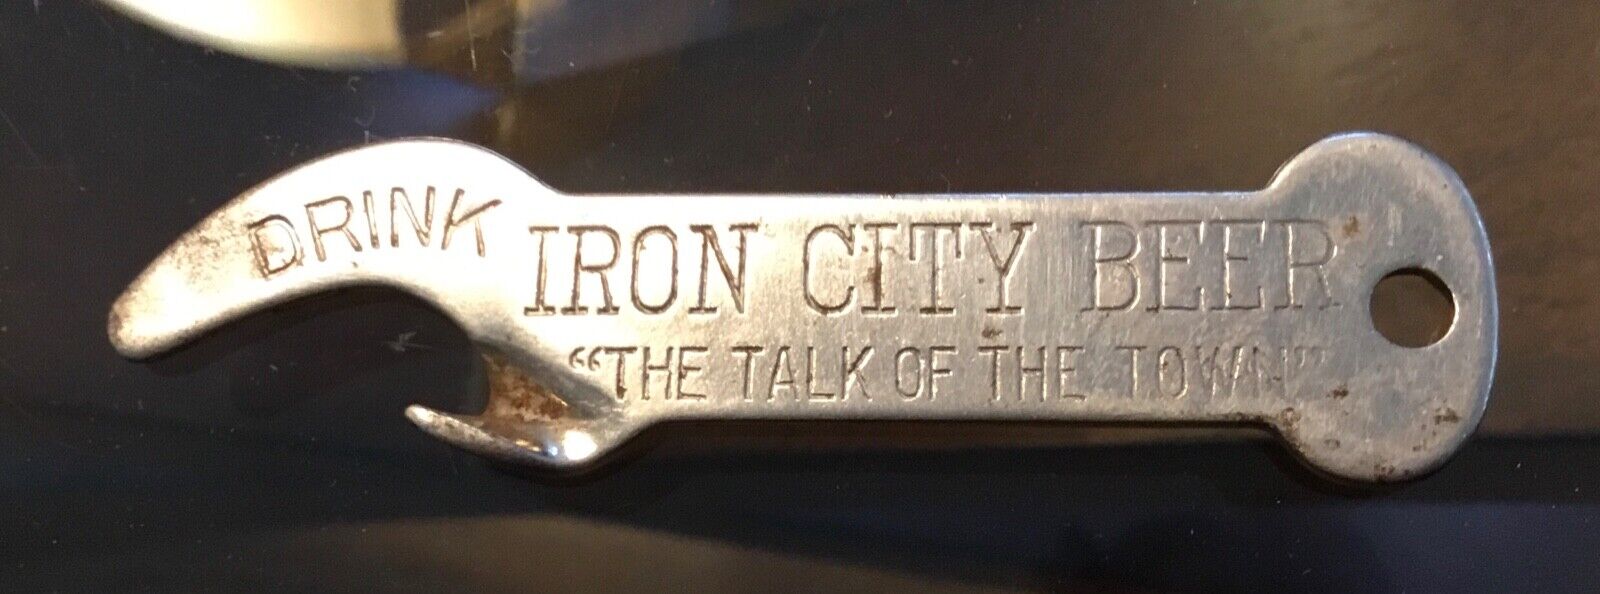 Early 1900s Iron City Beer Bottle Opener Pittsburgh PA Advertising 